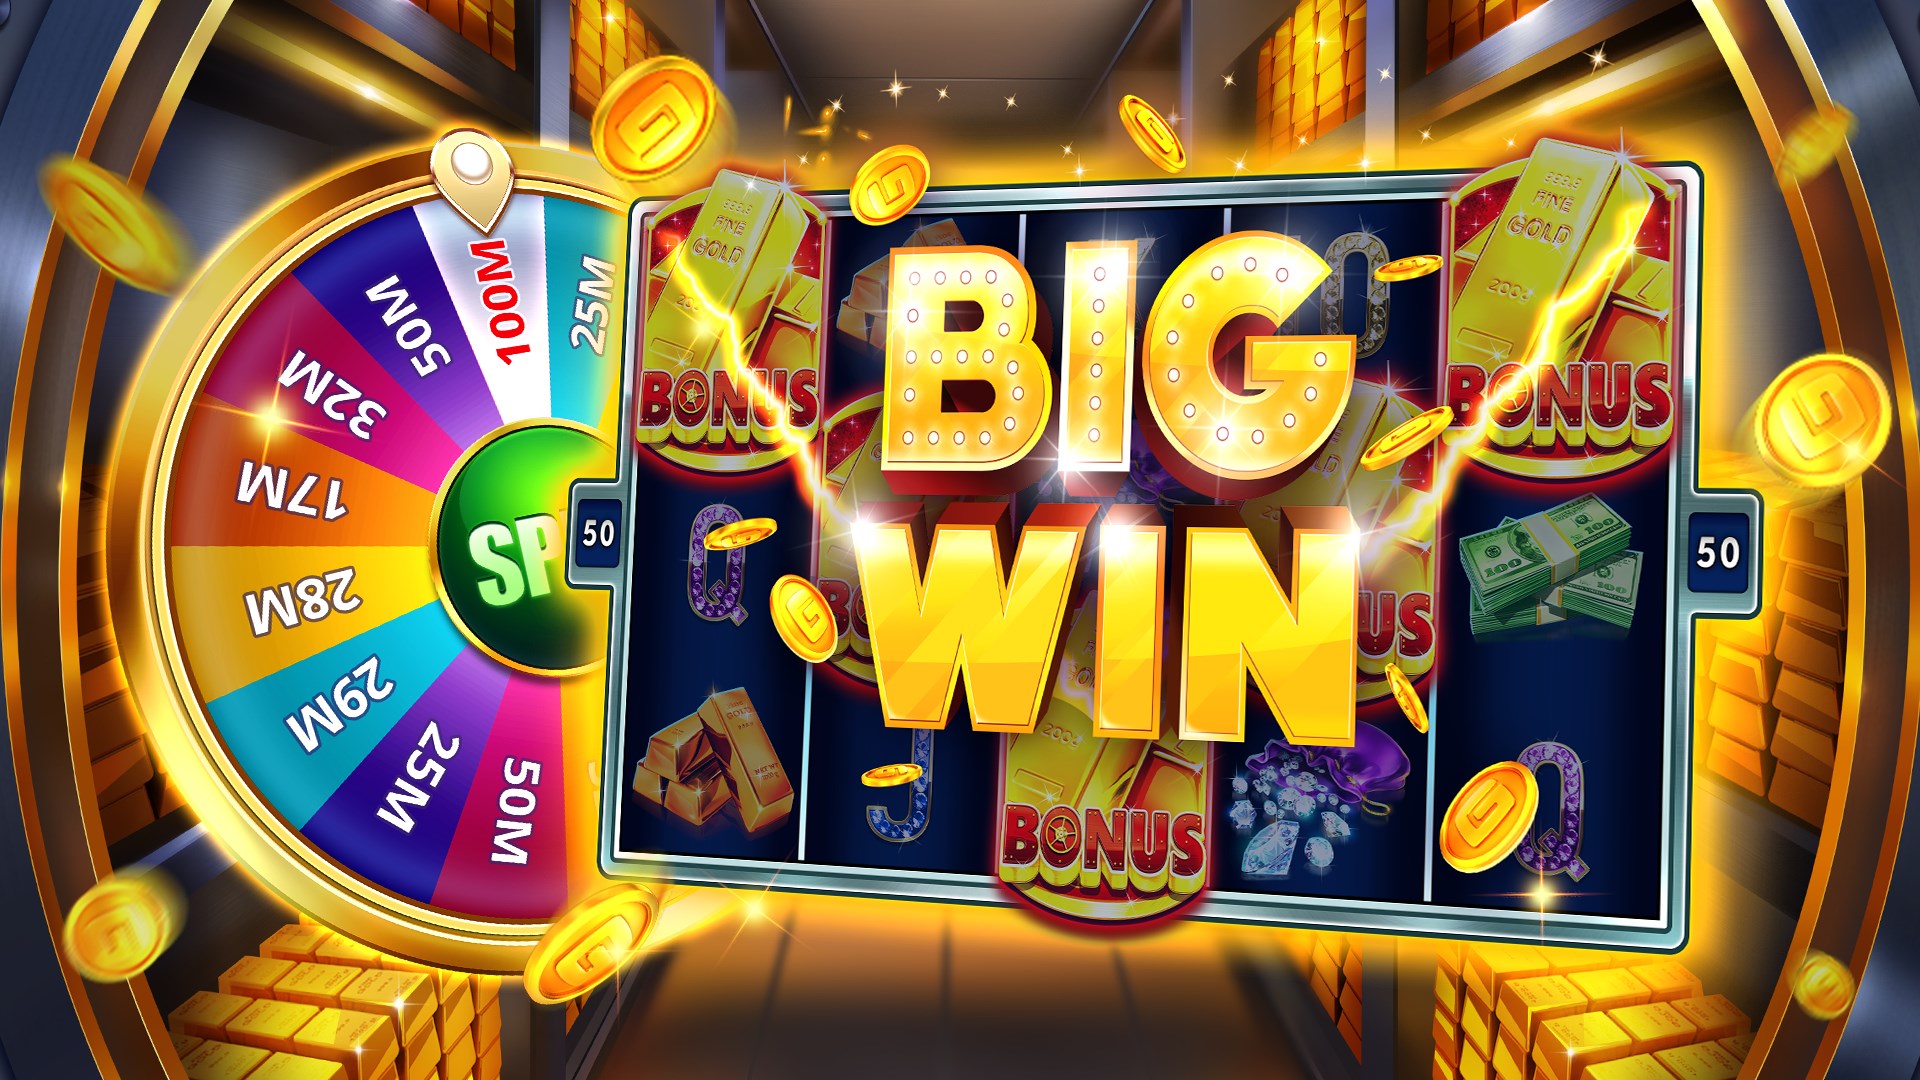 Have Fun and Win Big with Multiple Jackpot Slot Vietnam Games